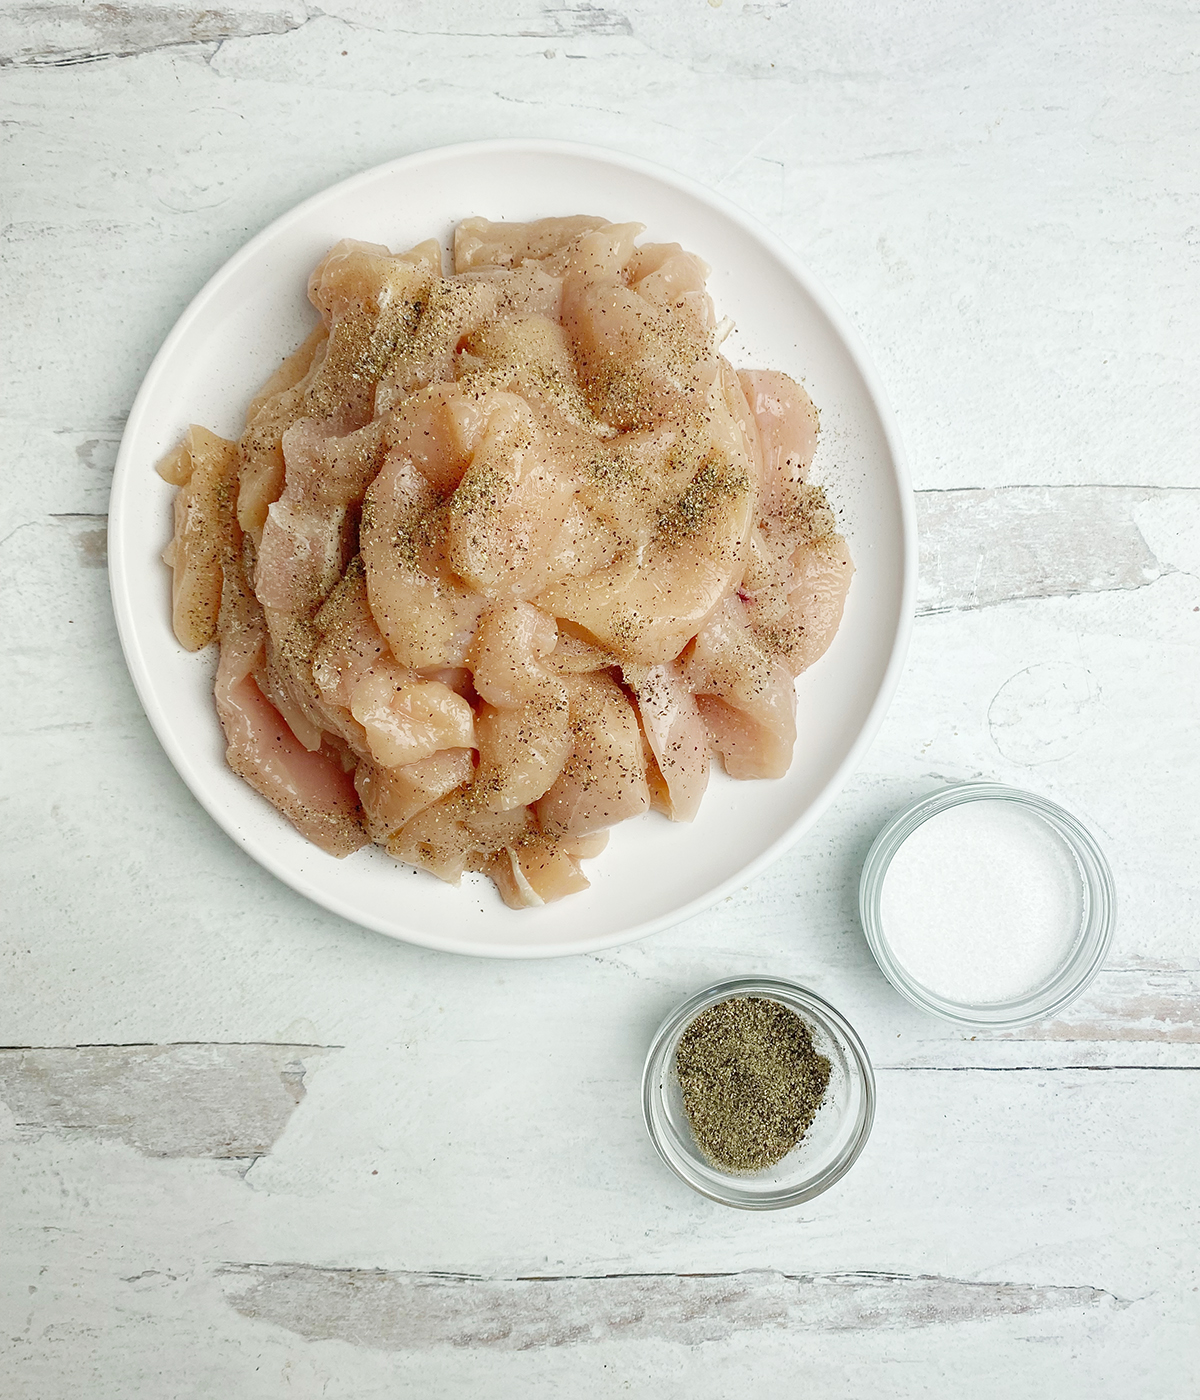 Raw boneless chicken breast pieces in a bowl with salt and pepper.